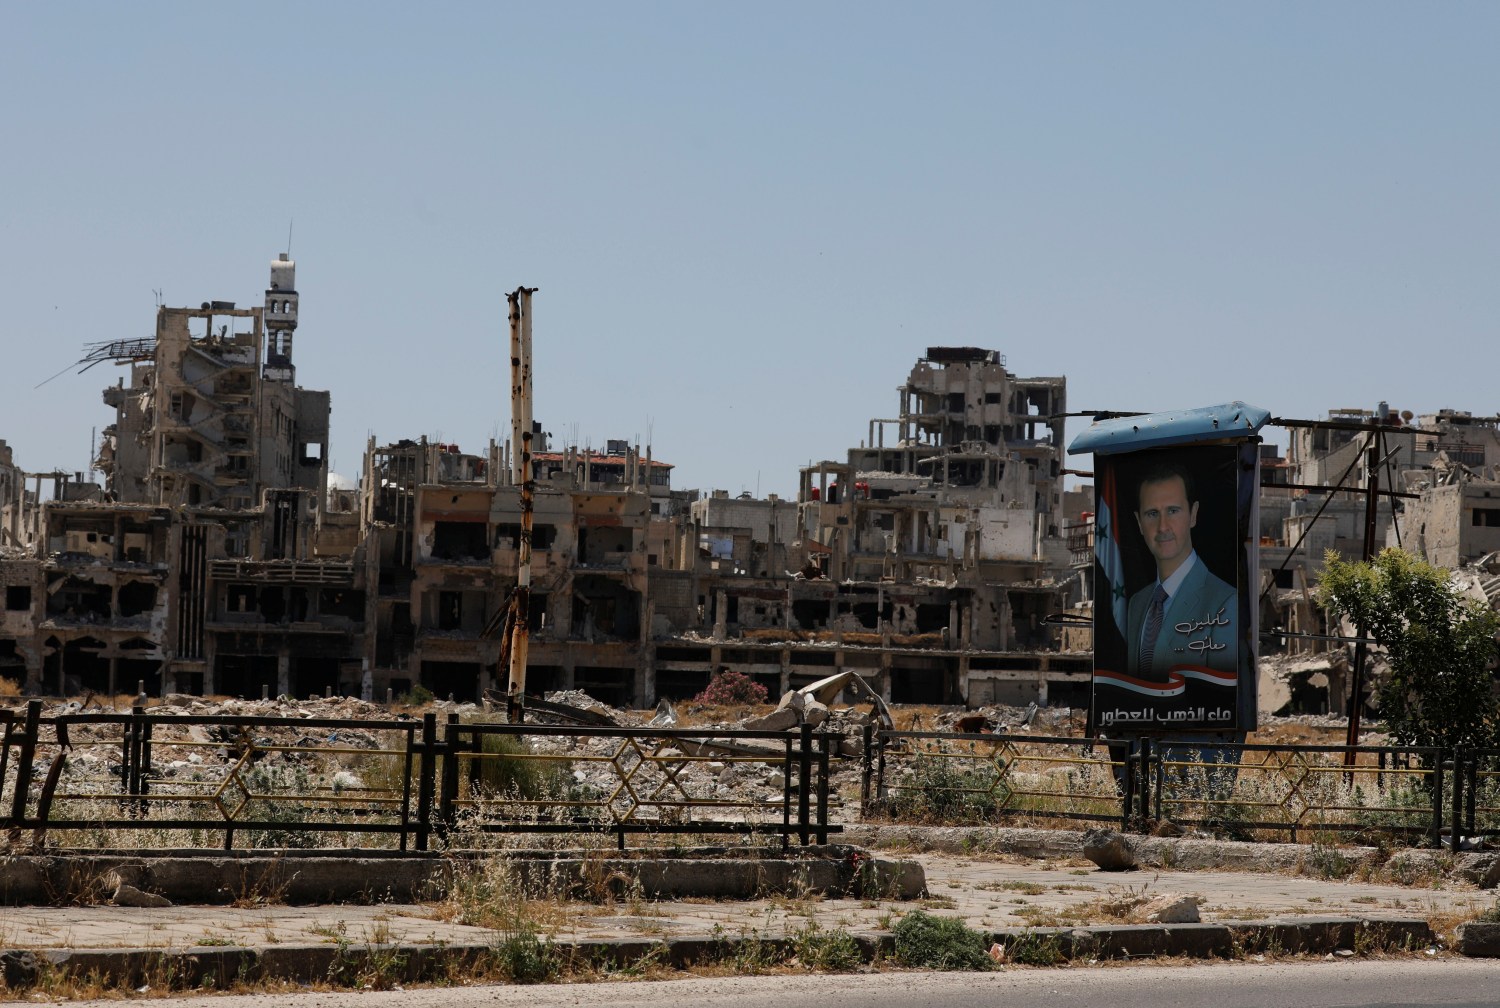 A poster depicting Syria's President Bashar al-Assad is pictured near damaged buildings, ahead of the May 26 presidential election, in Homs, Syria May 23, 2021. Picture taken May 23, 2021. REUTERS/Omar Sanadiki